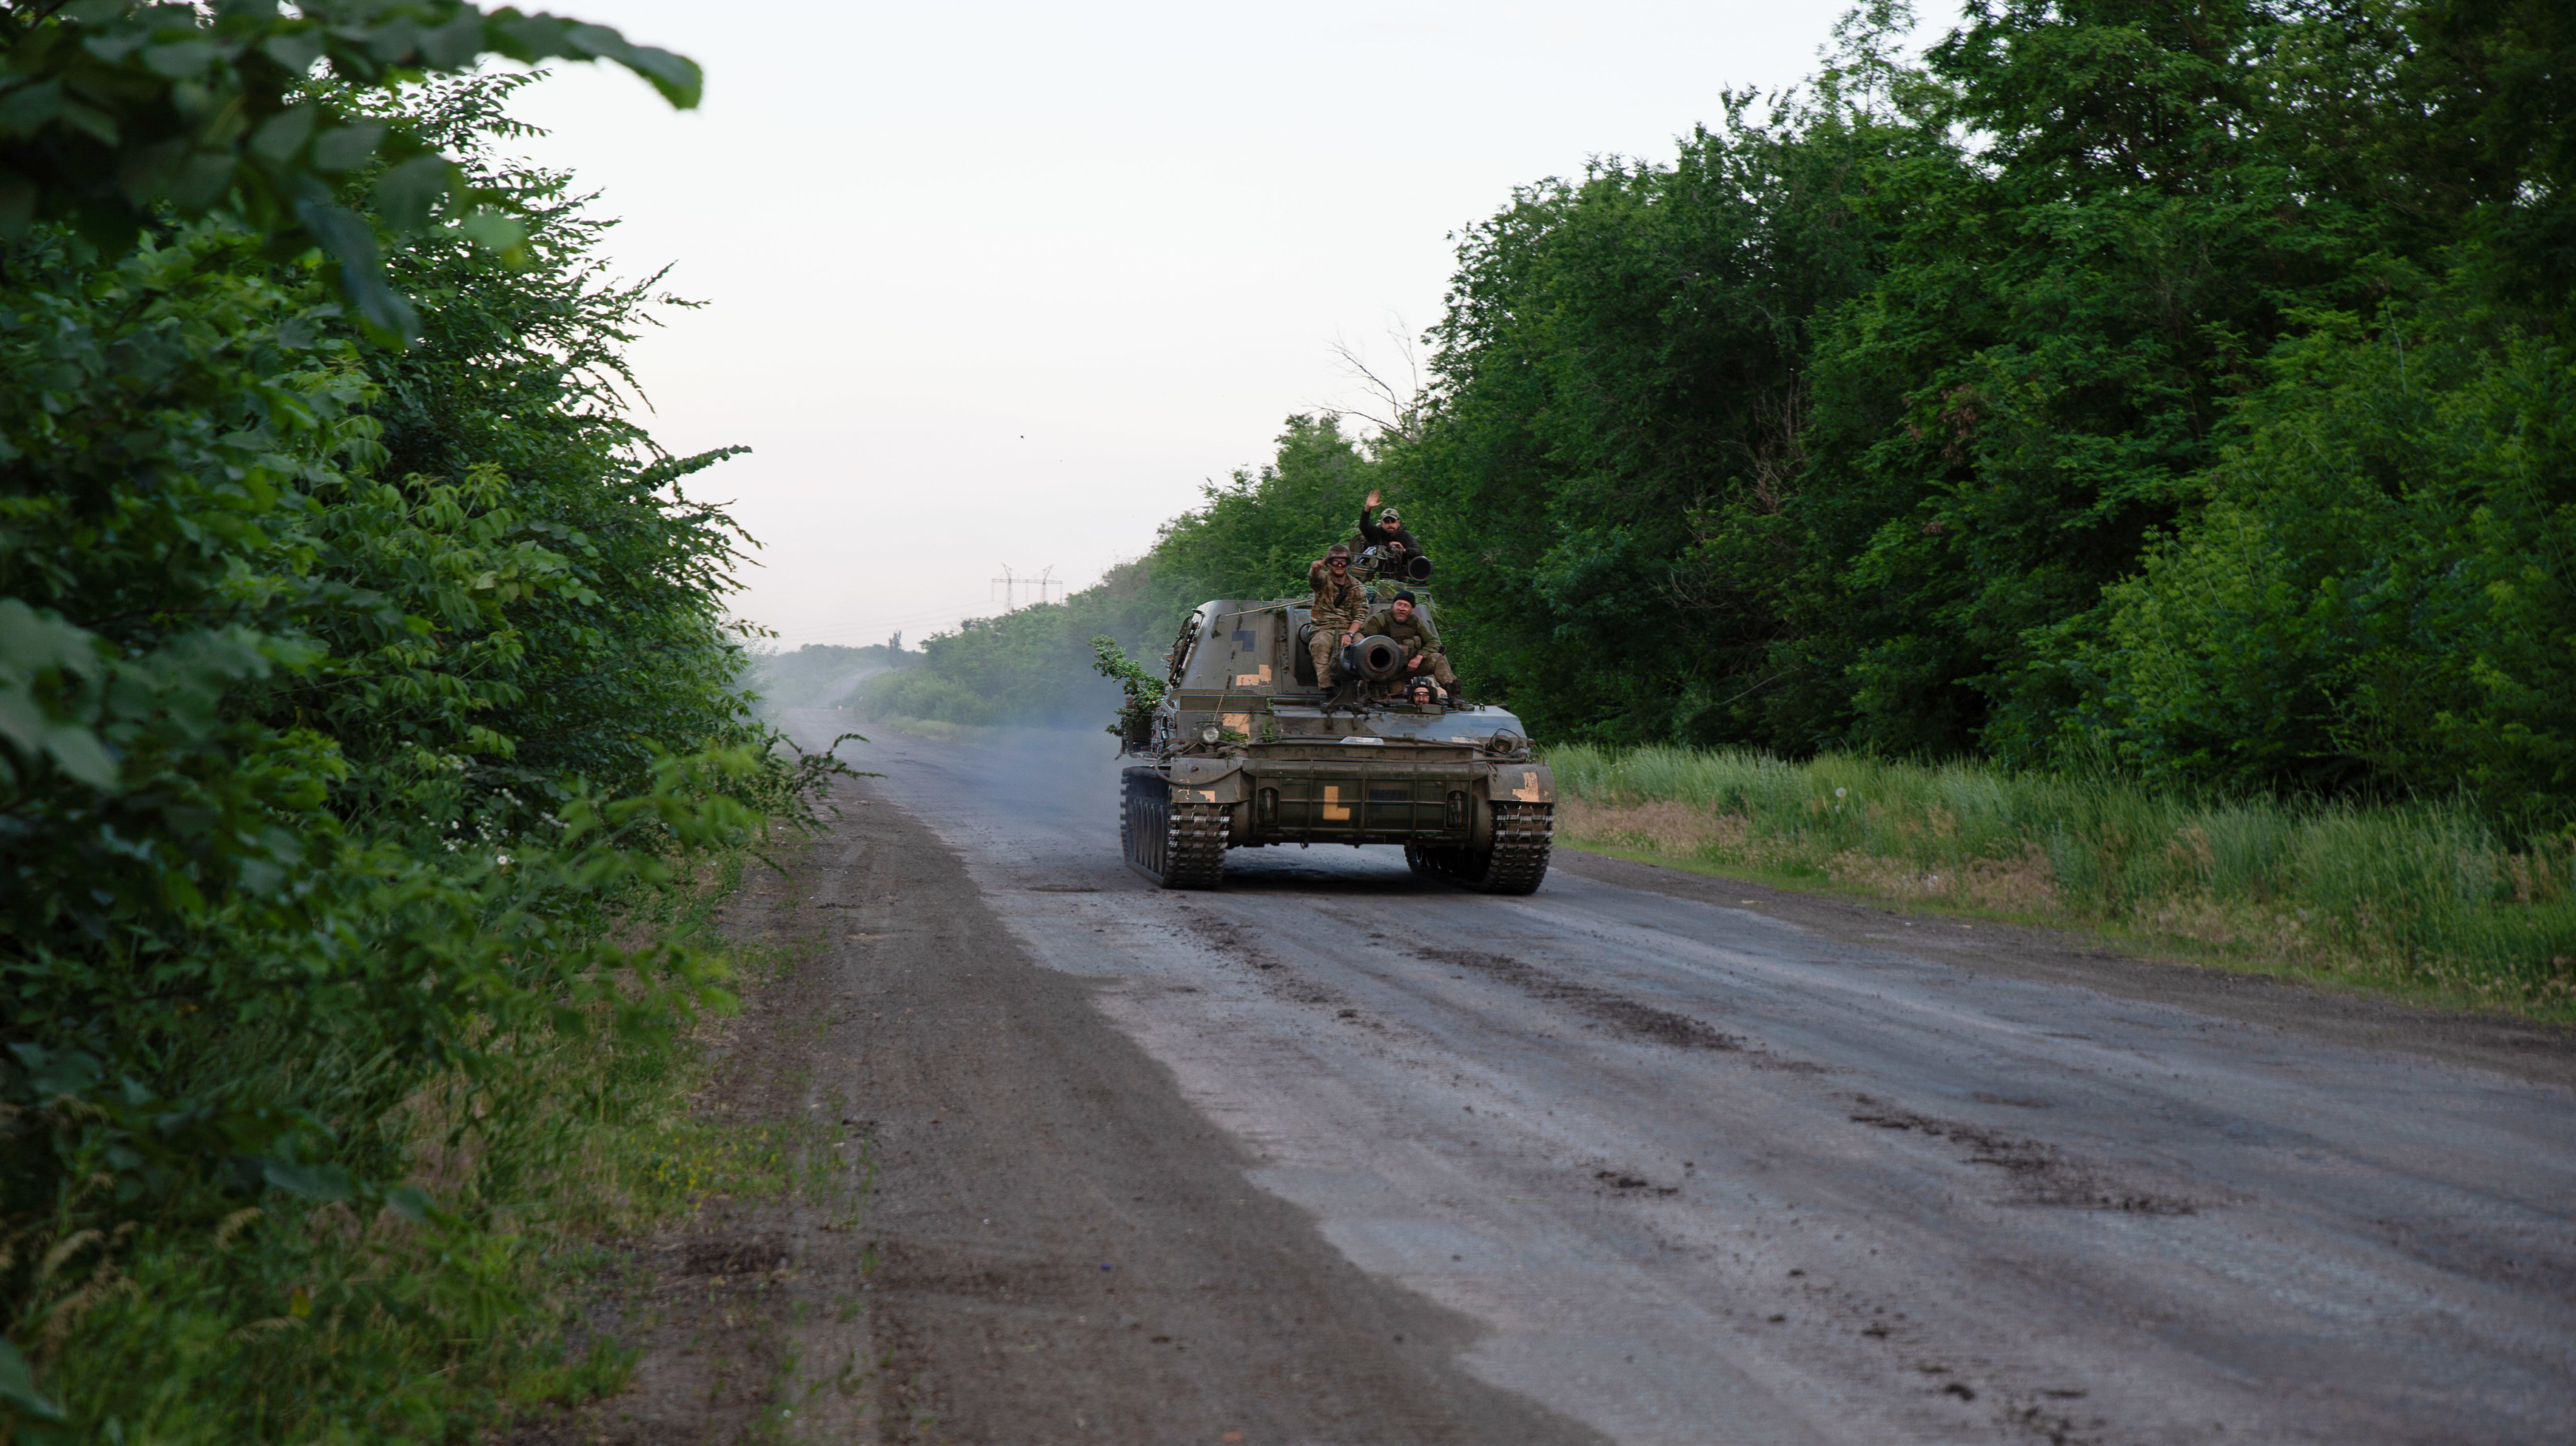 Ukrainian soldiers ride on an armored vehicle outside